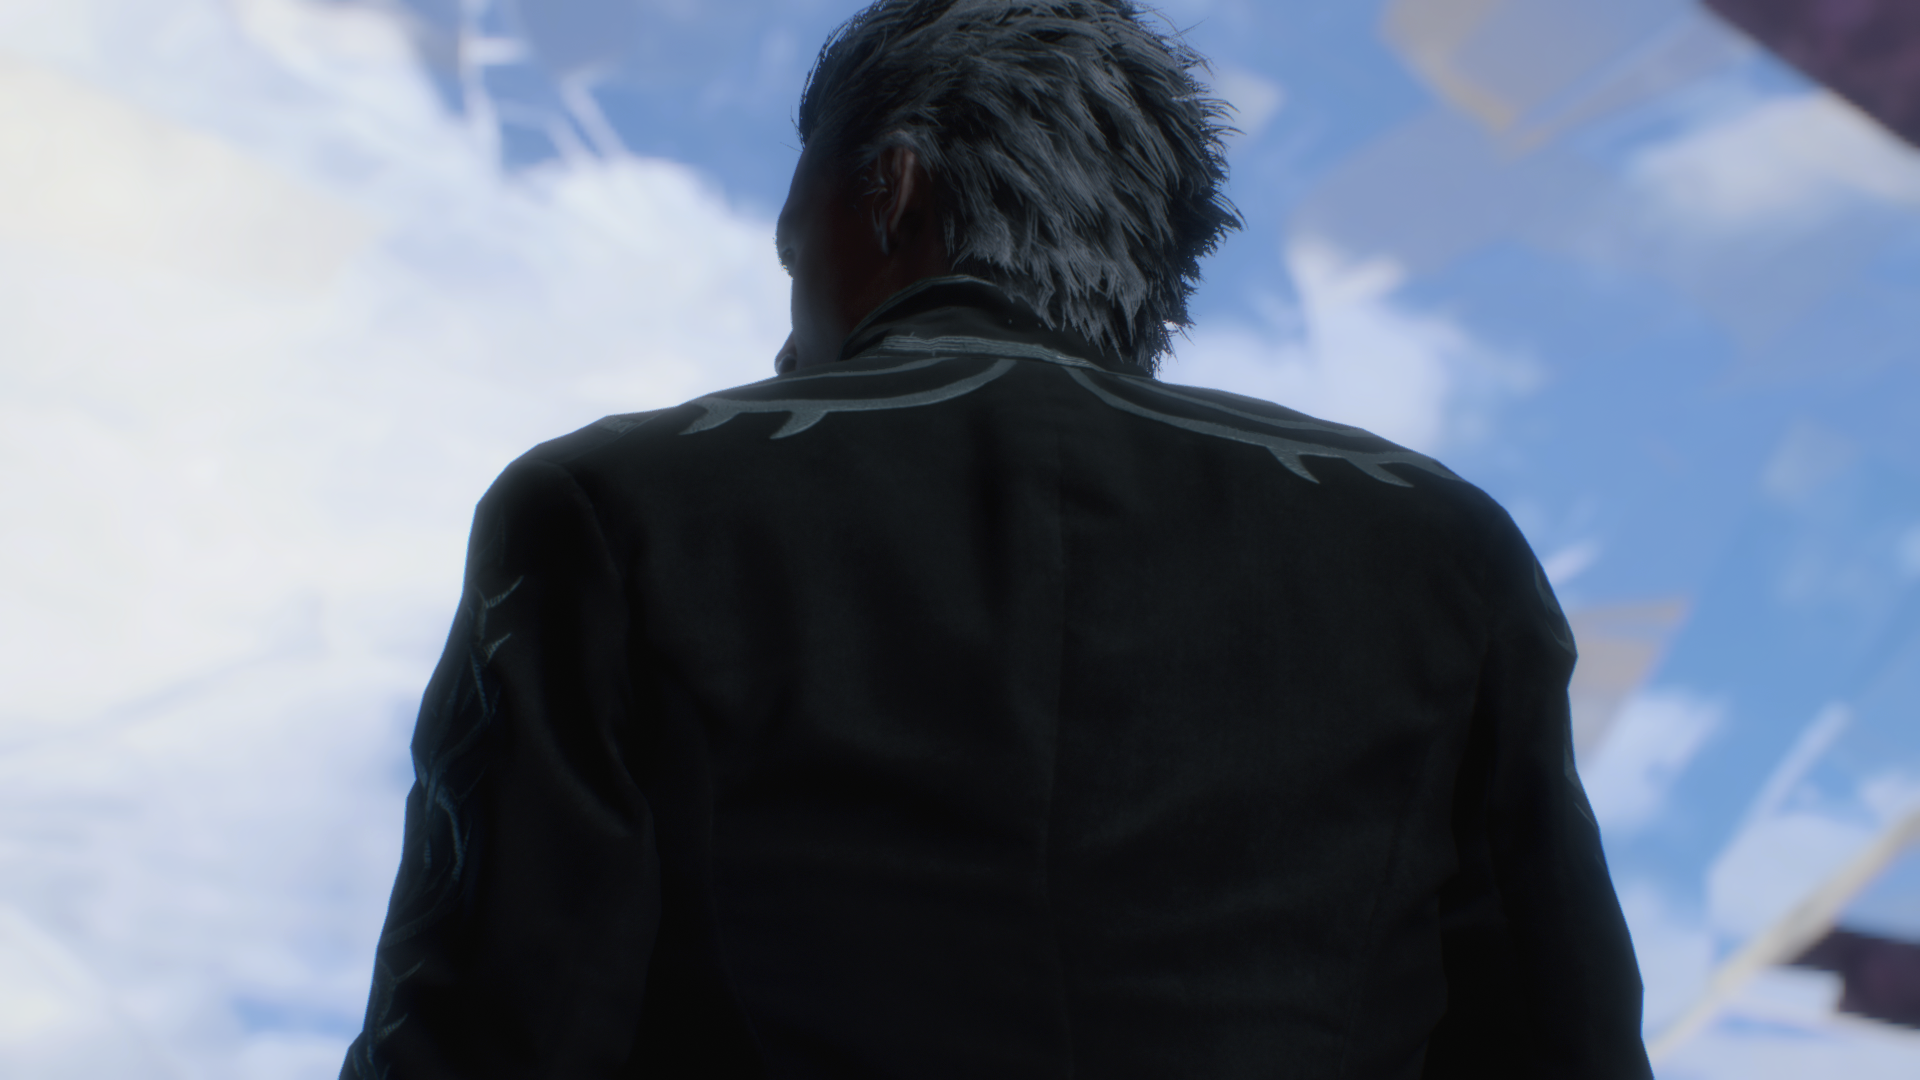 Video Game Devil May Cry 5 HD Wallpaper | Background Image